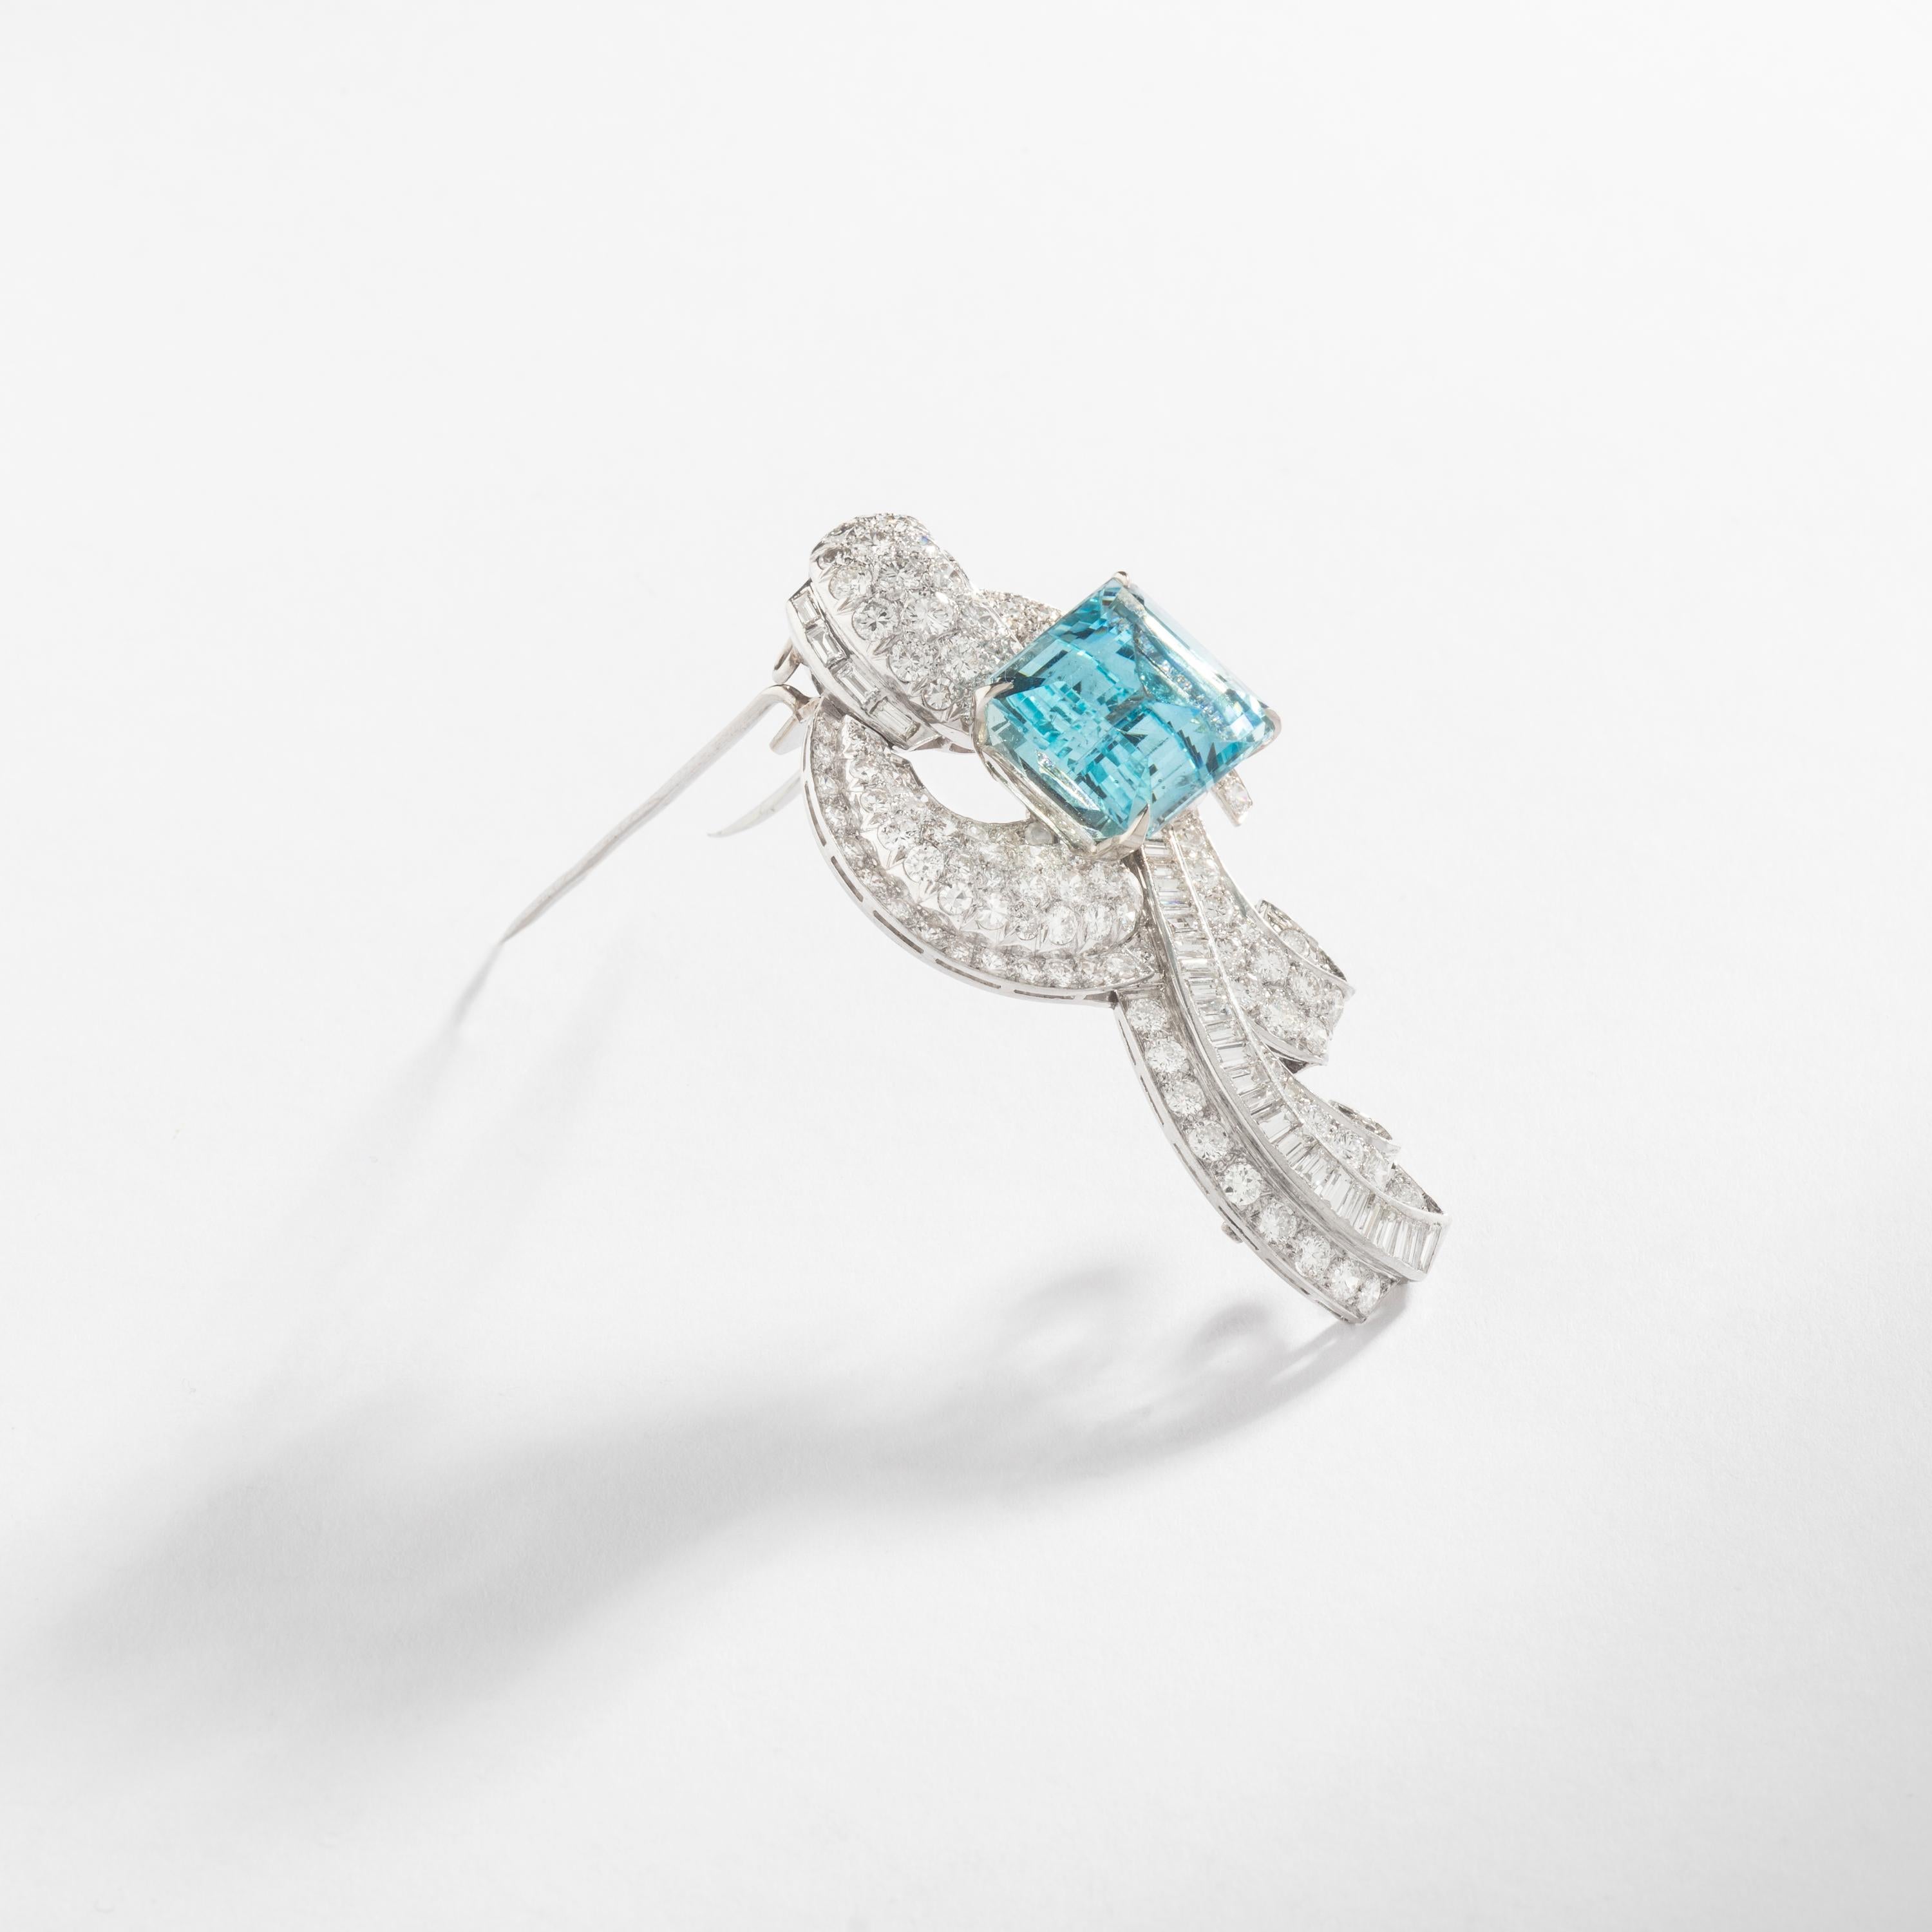 Aquamarine (approximately 17.50 carats) on a Round and Baguette cut Diamond (approximately 5.00 carats) Platinum Brooch convertible in Pendant.

Circa 1935.
Total length: 2.36 inches (6.00 centimeters).
